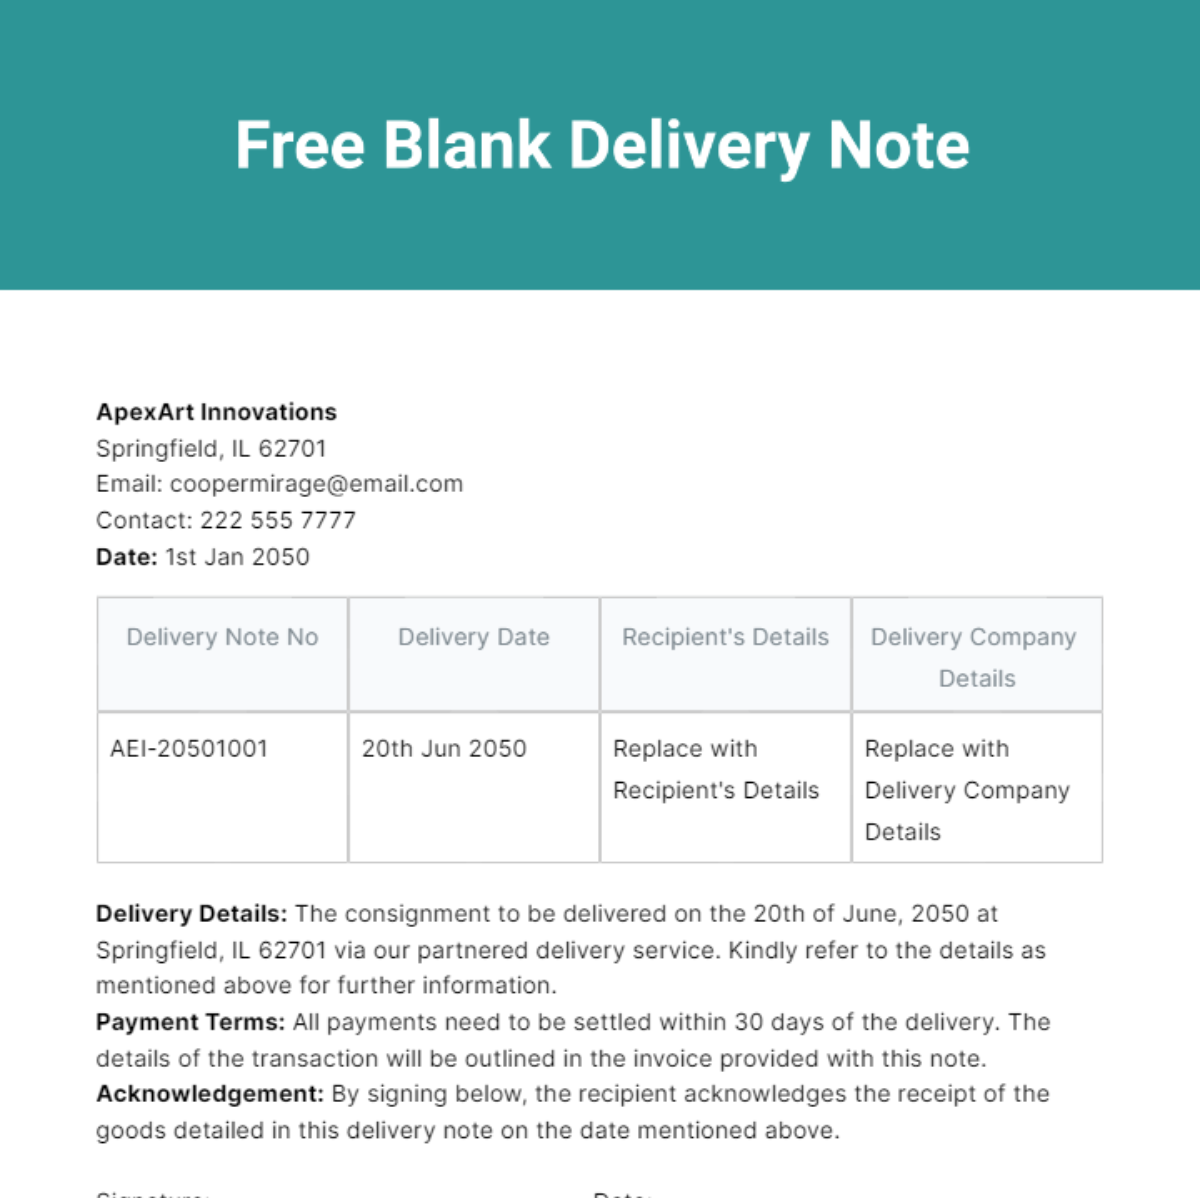 Blank Delivery Note Template